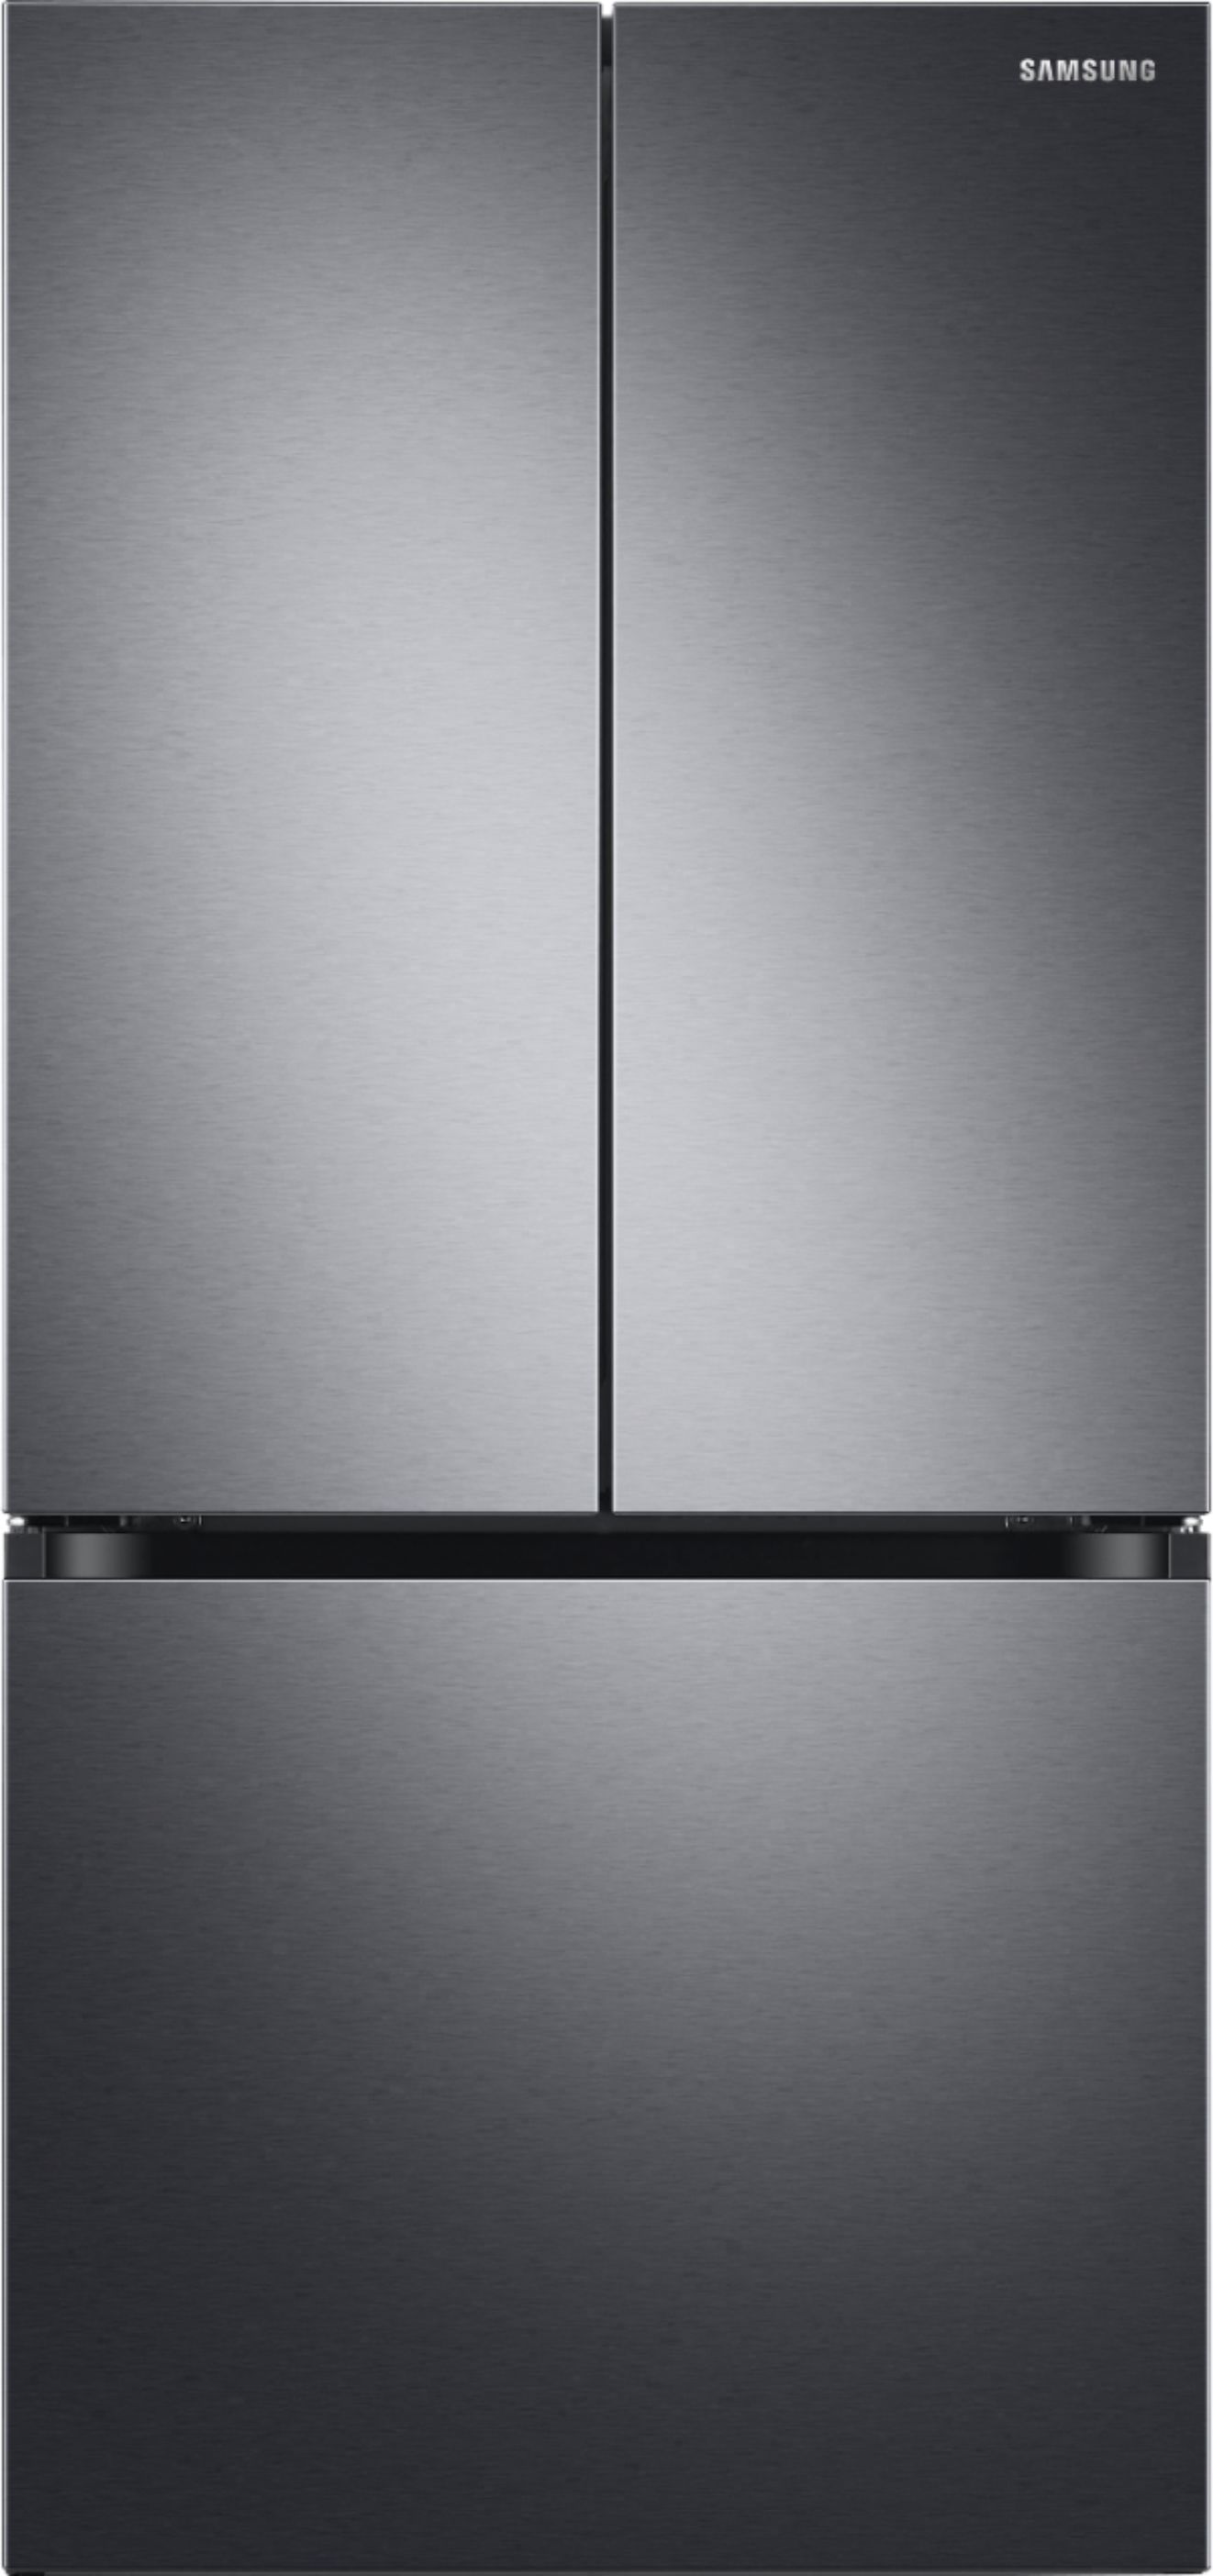 Samsung - 17.5 cu. ft. Counter Depth 3-Door French Door Refrigerator with WiFi and Twin Cooling Plus® - Black stainless steel